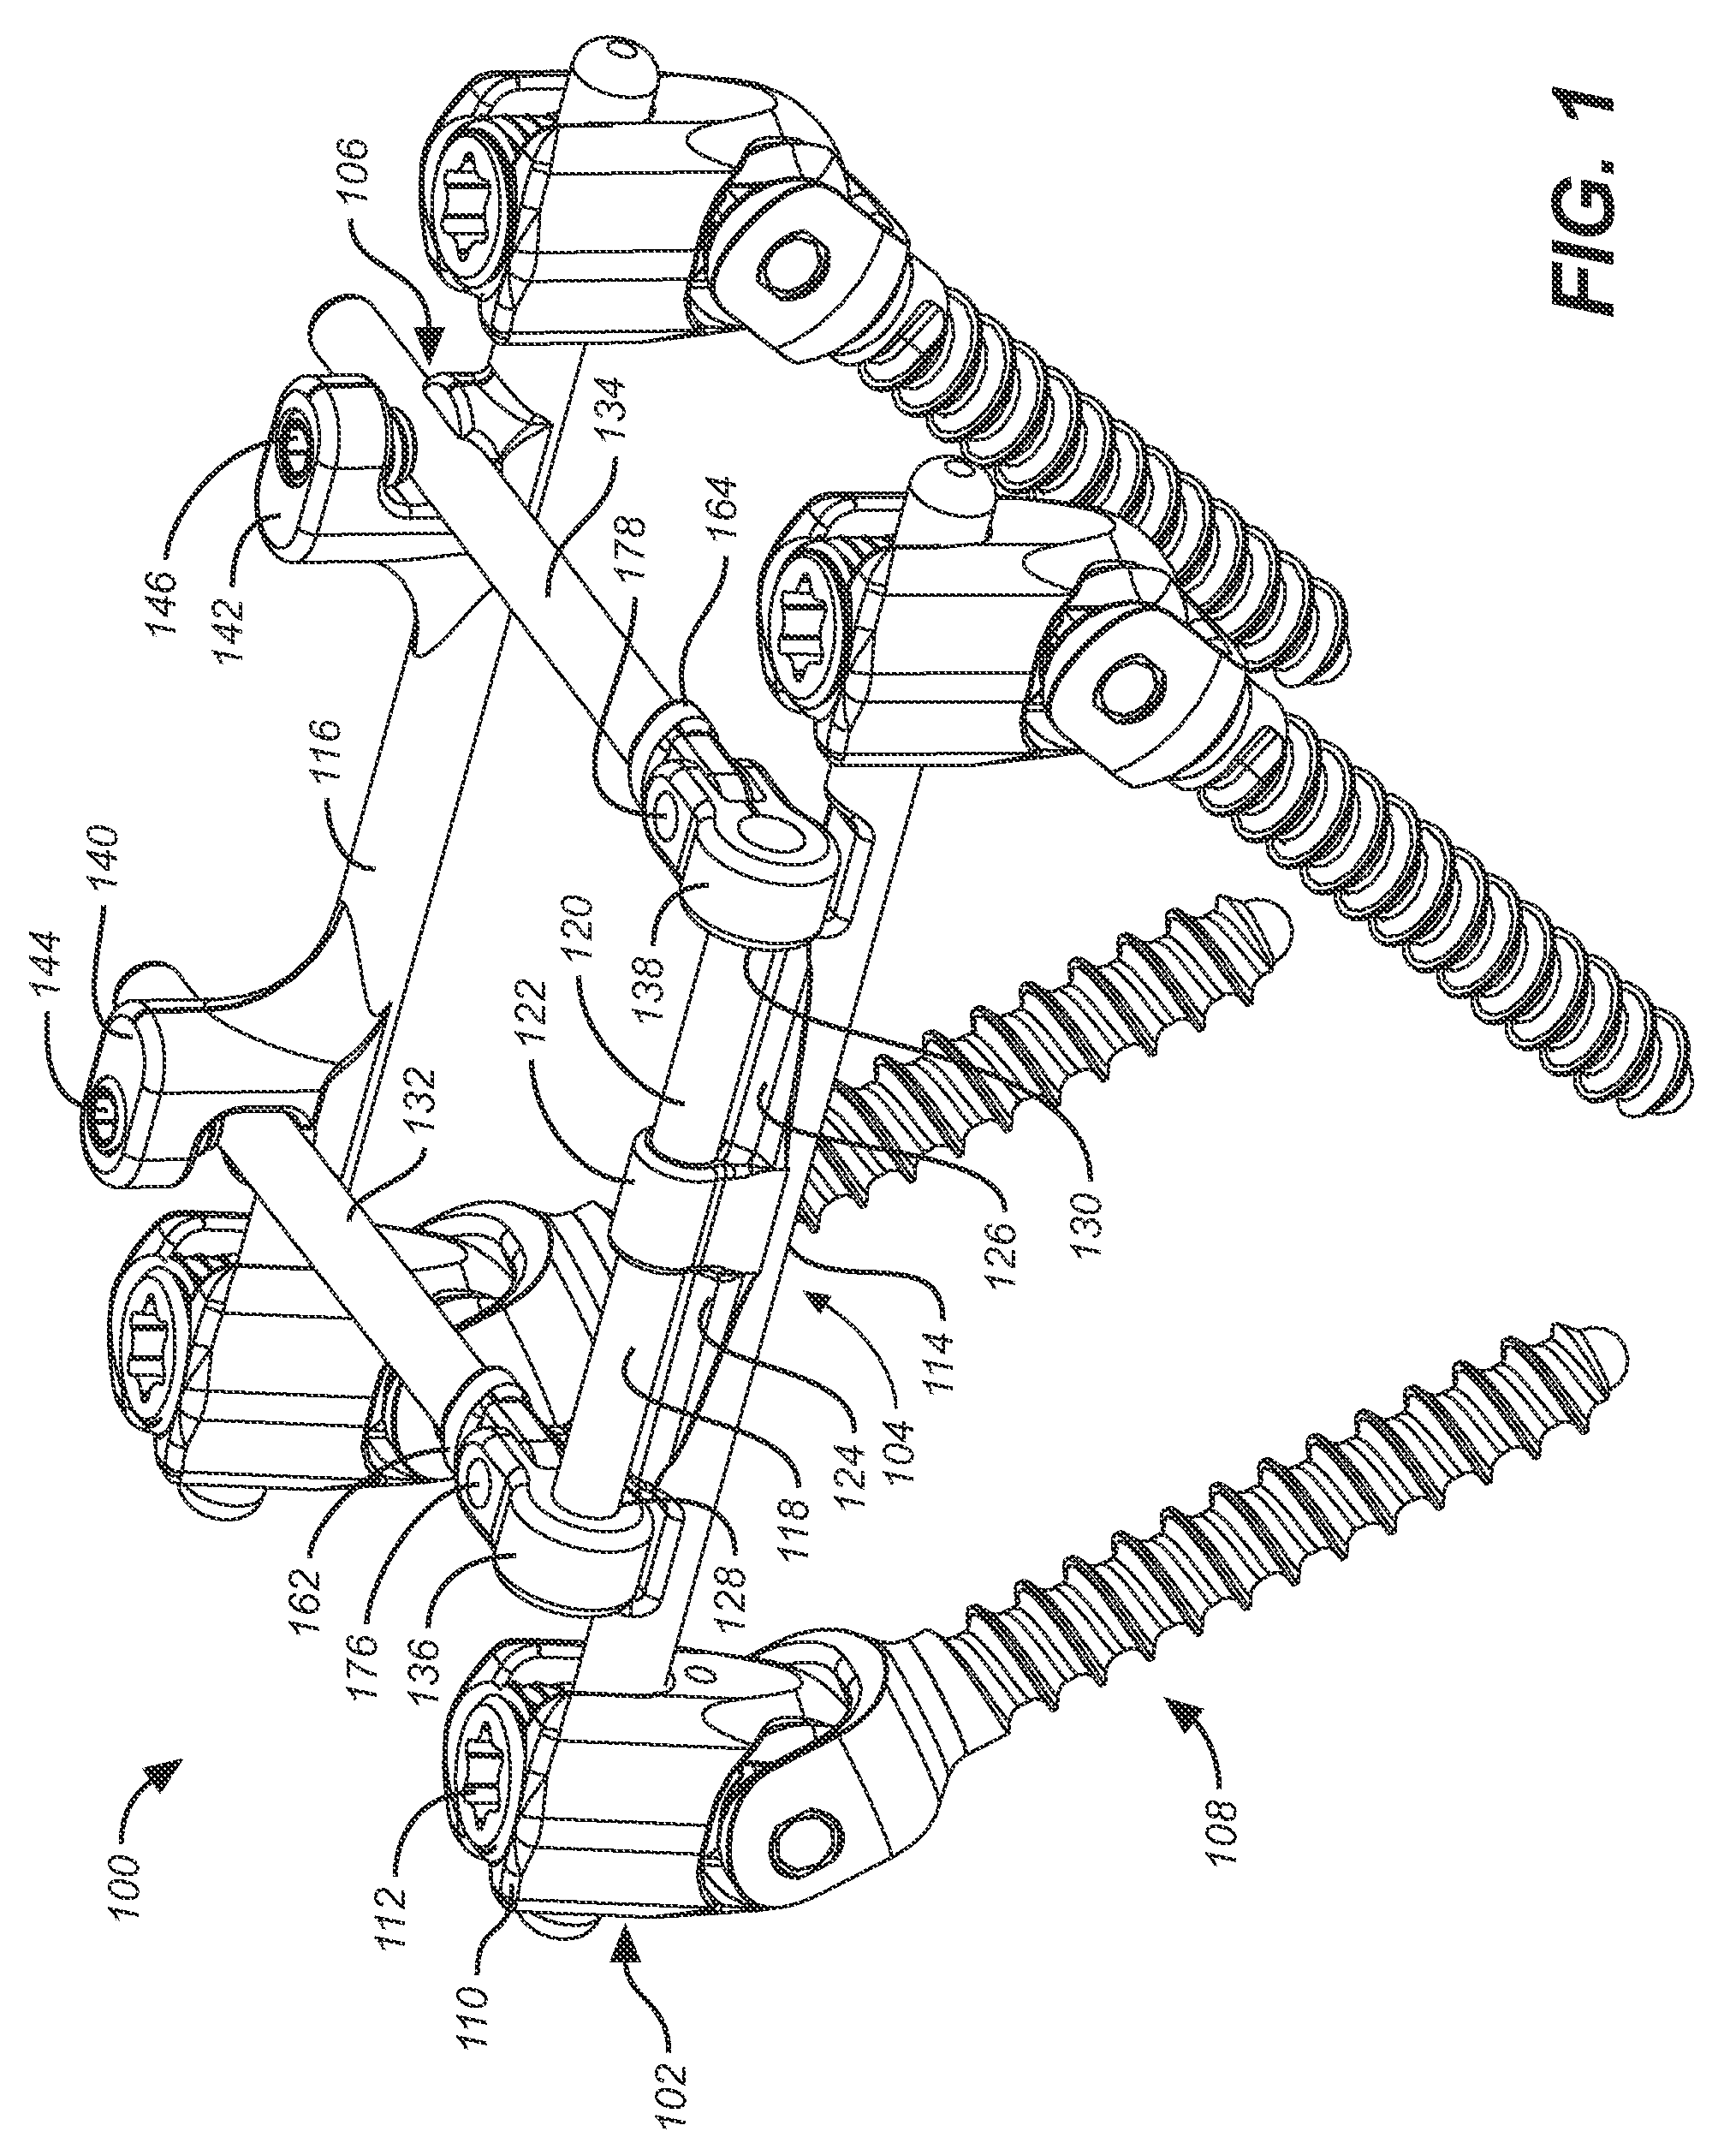 Bone anchor with a yoke-shaped anchor head for a dynamic stabilization and motion preservation spinal implantation system and method